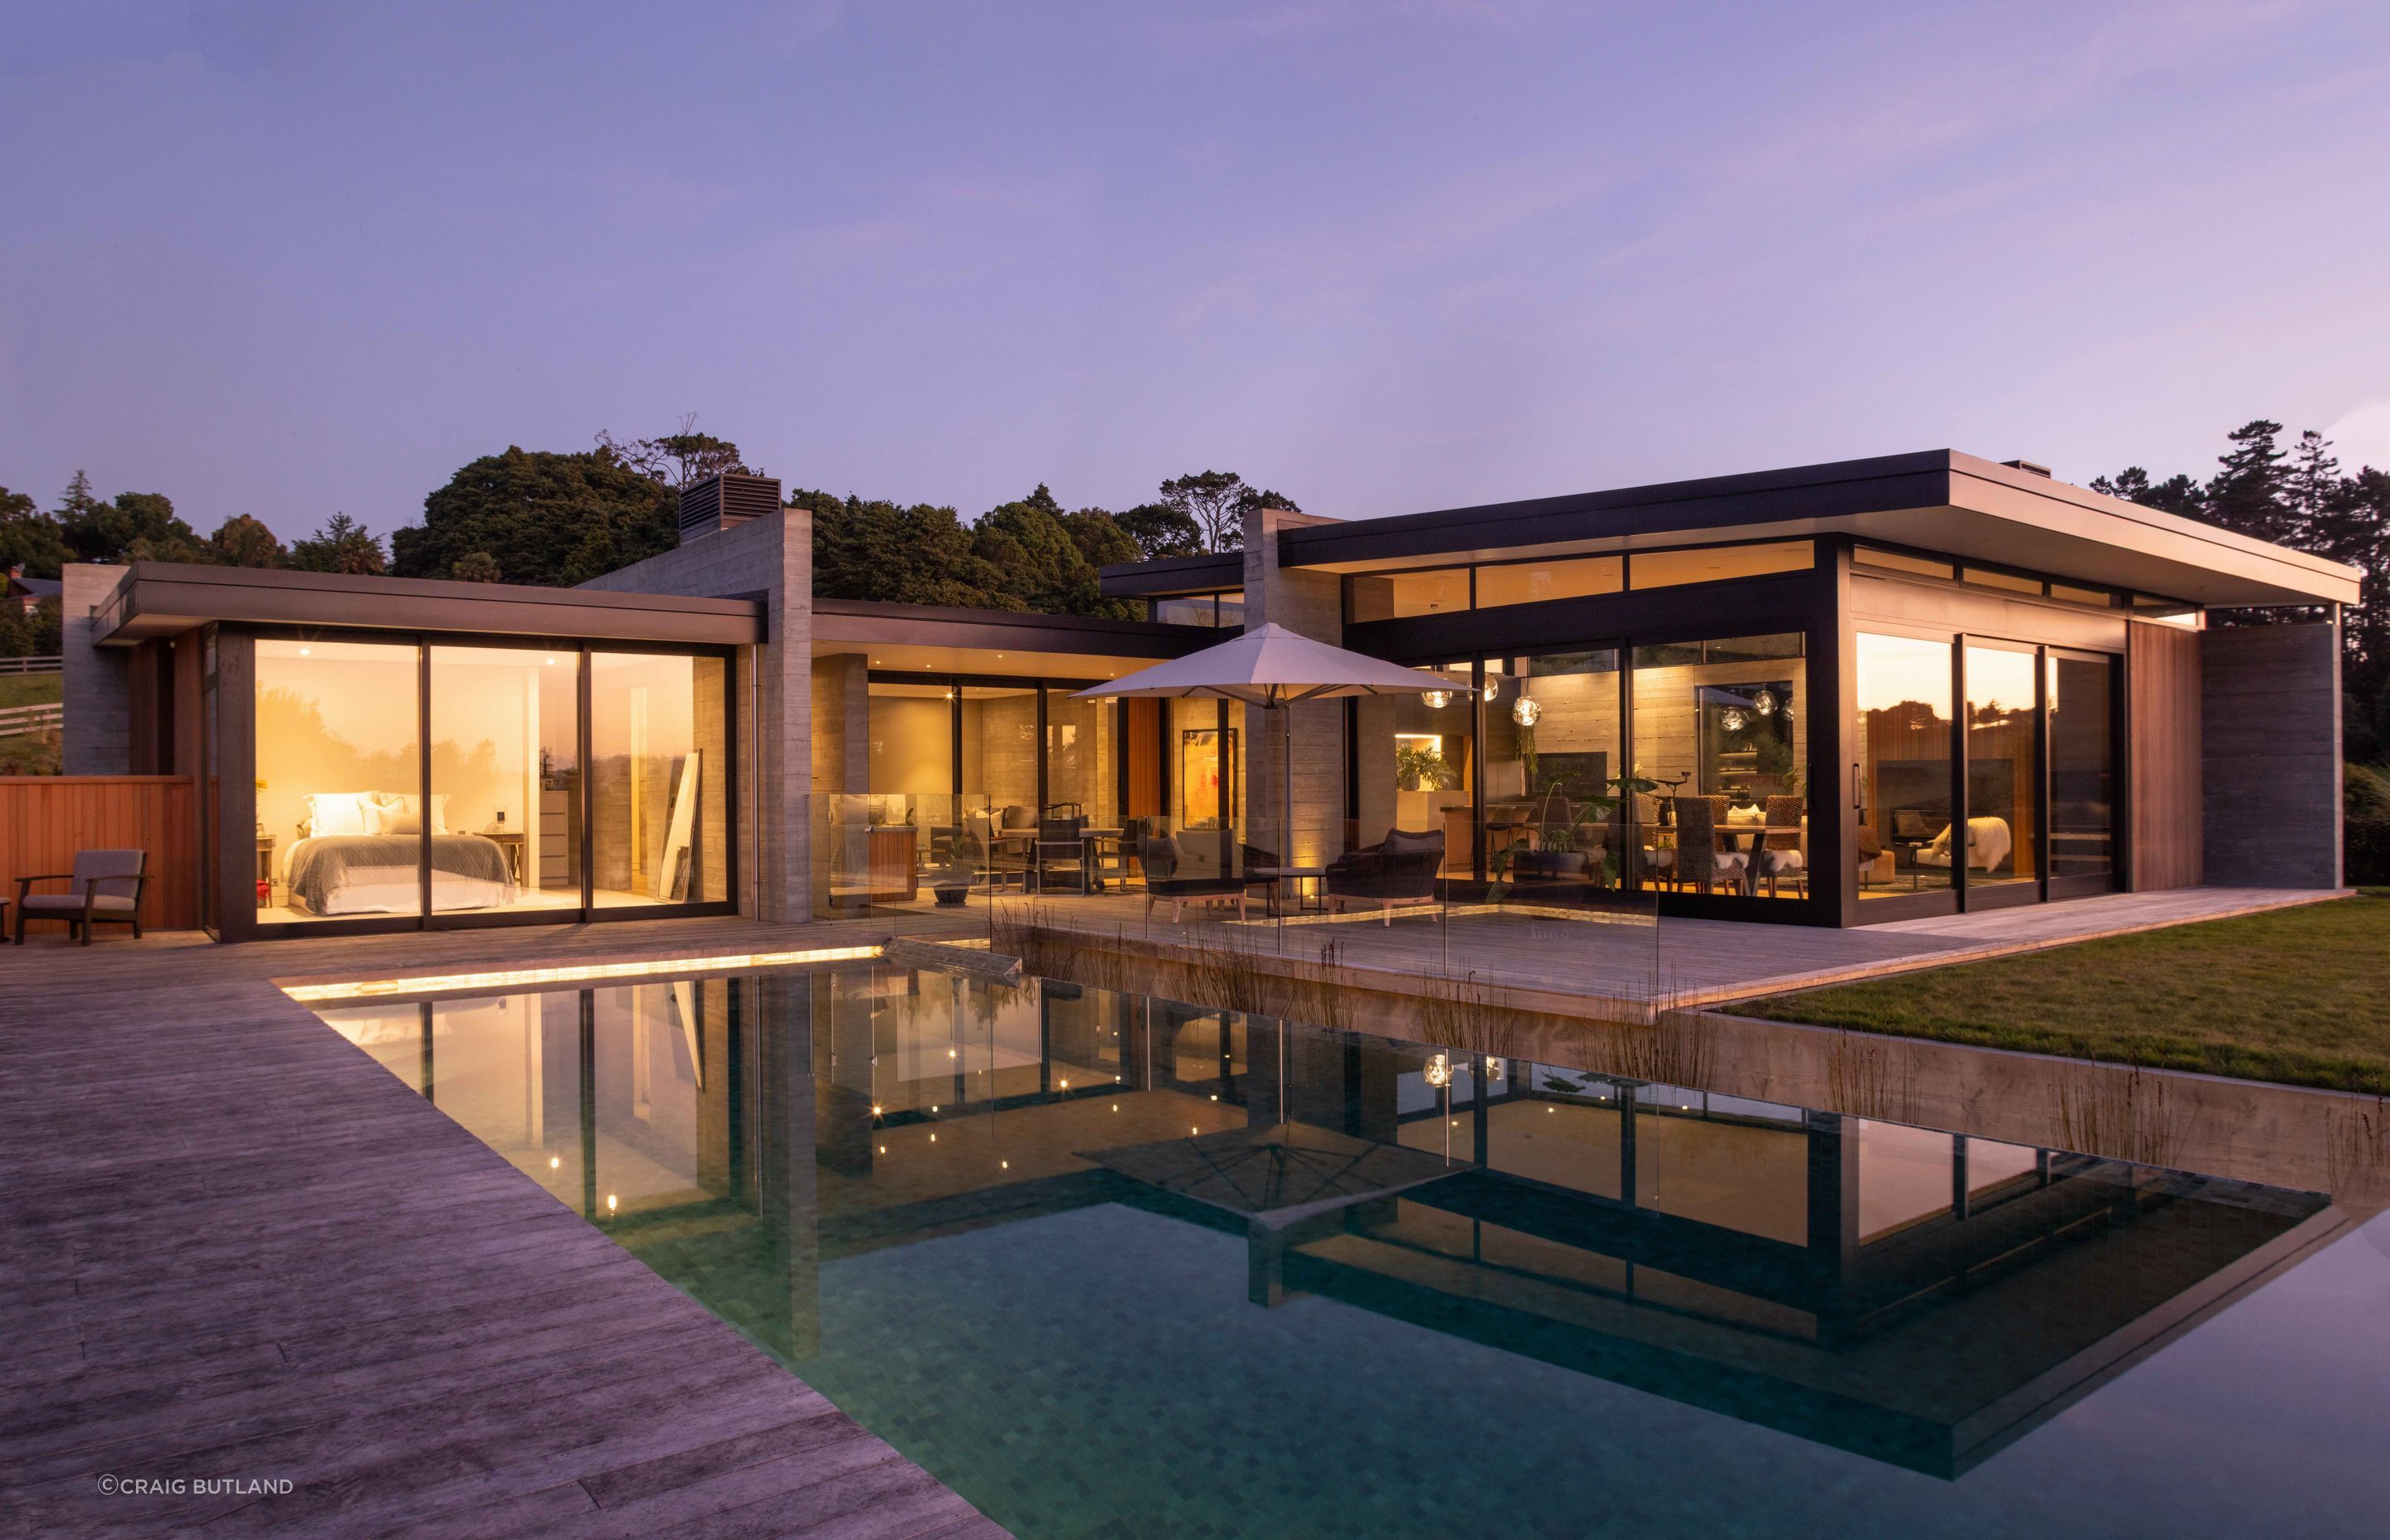 Large expanses of glass allow the glow from the interior to spill out over the exterior entertaining area and pool.